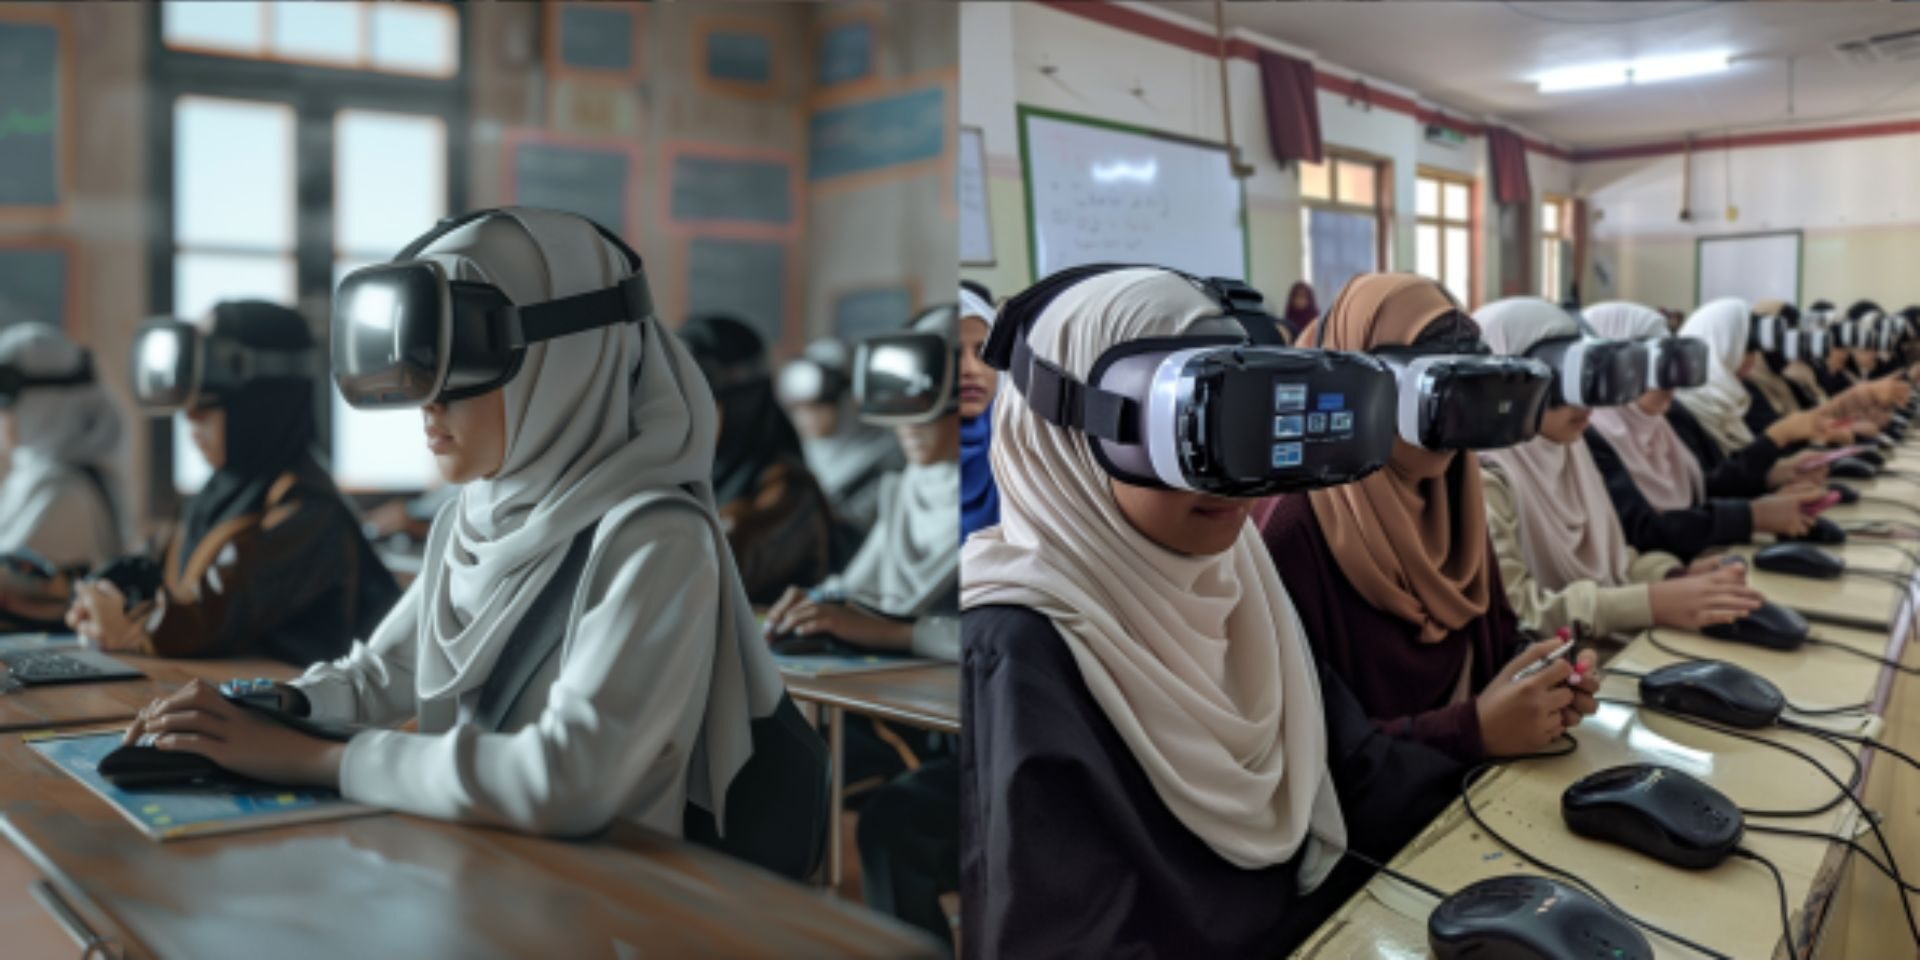 Empowering Libya’s Future: EON Reality Transforms Education with Immersive XR and AI Technologies